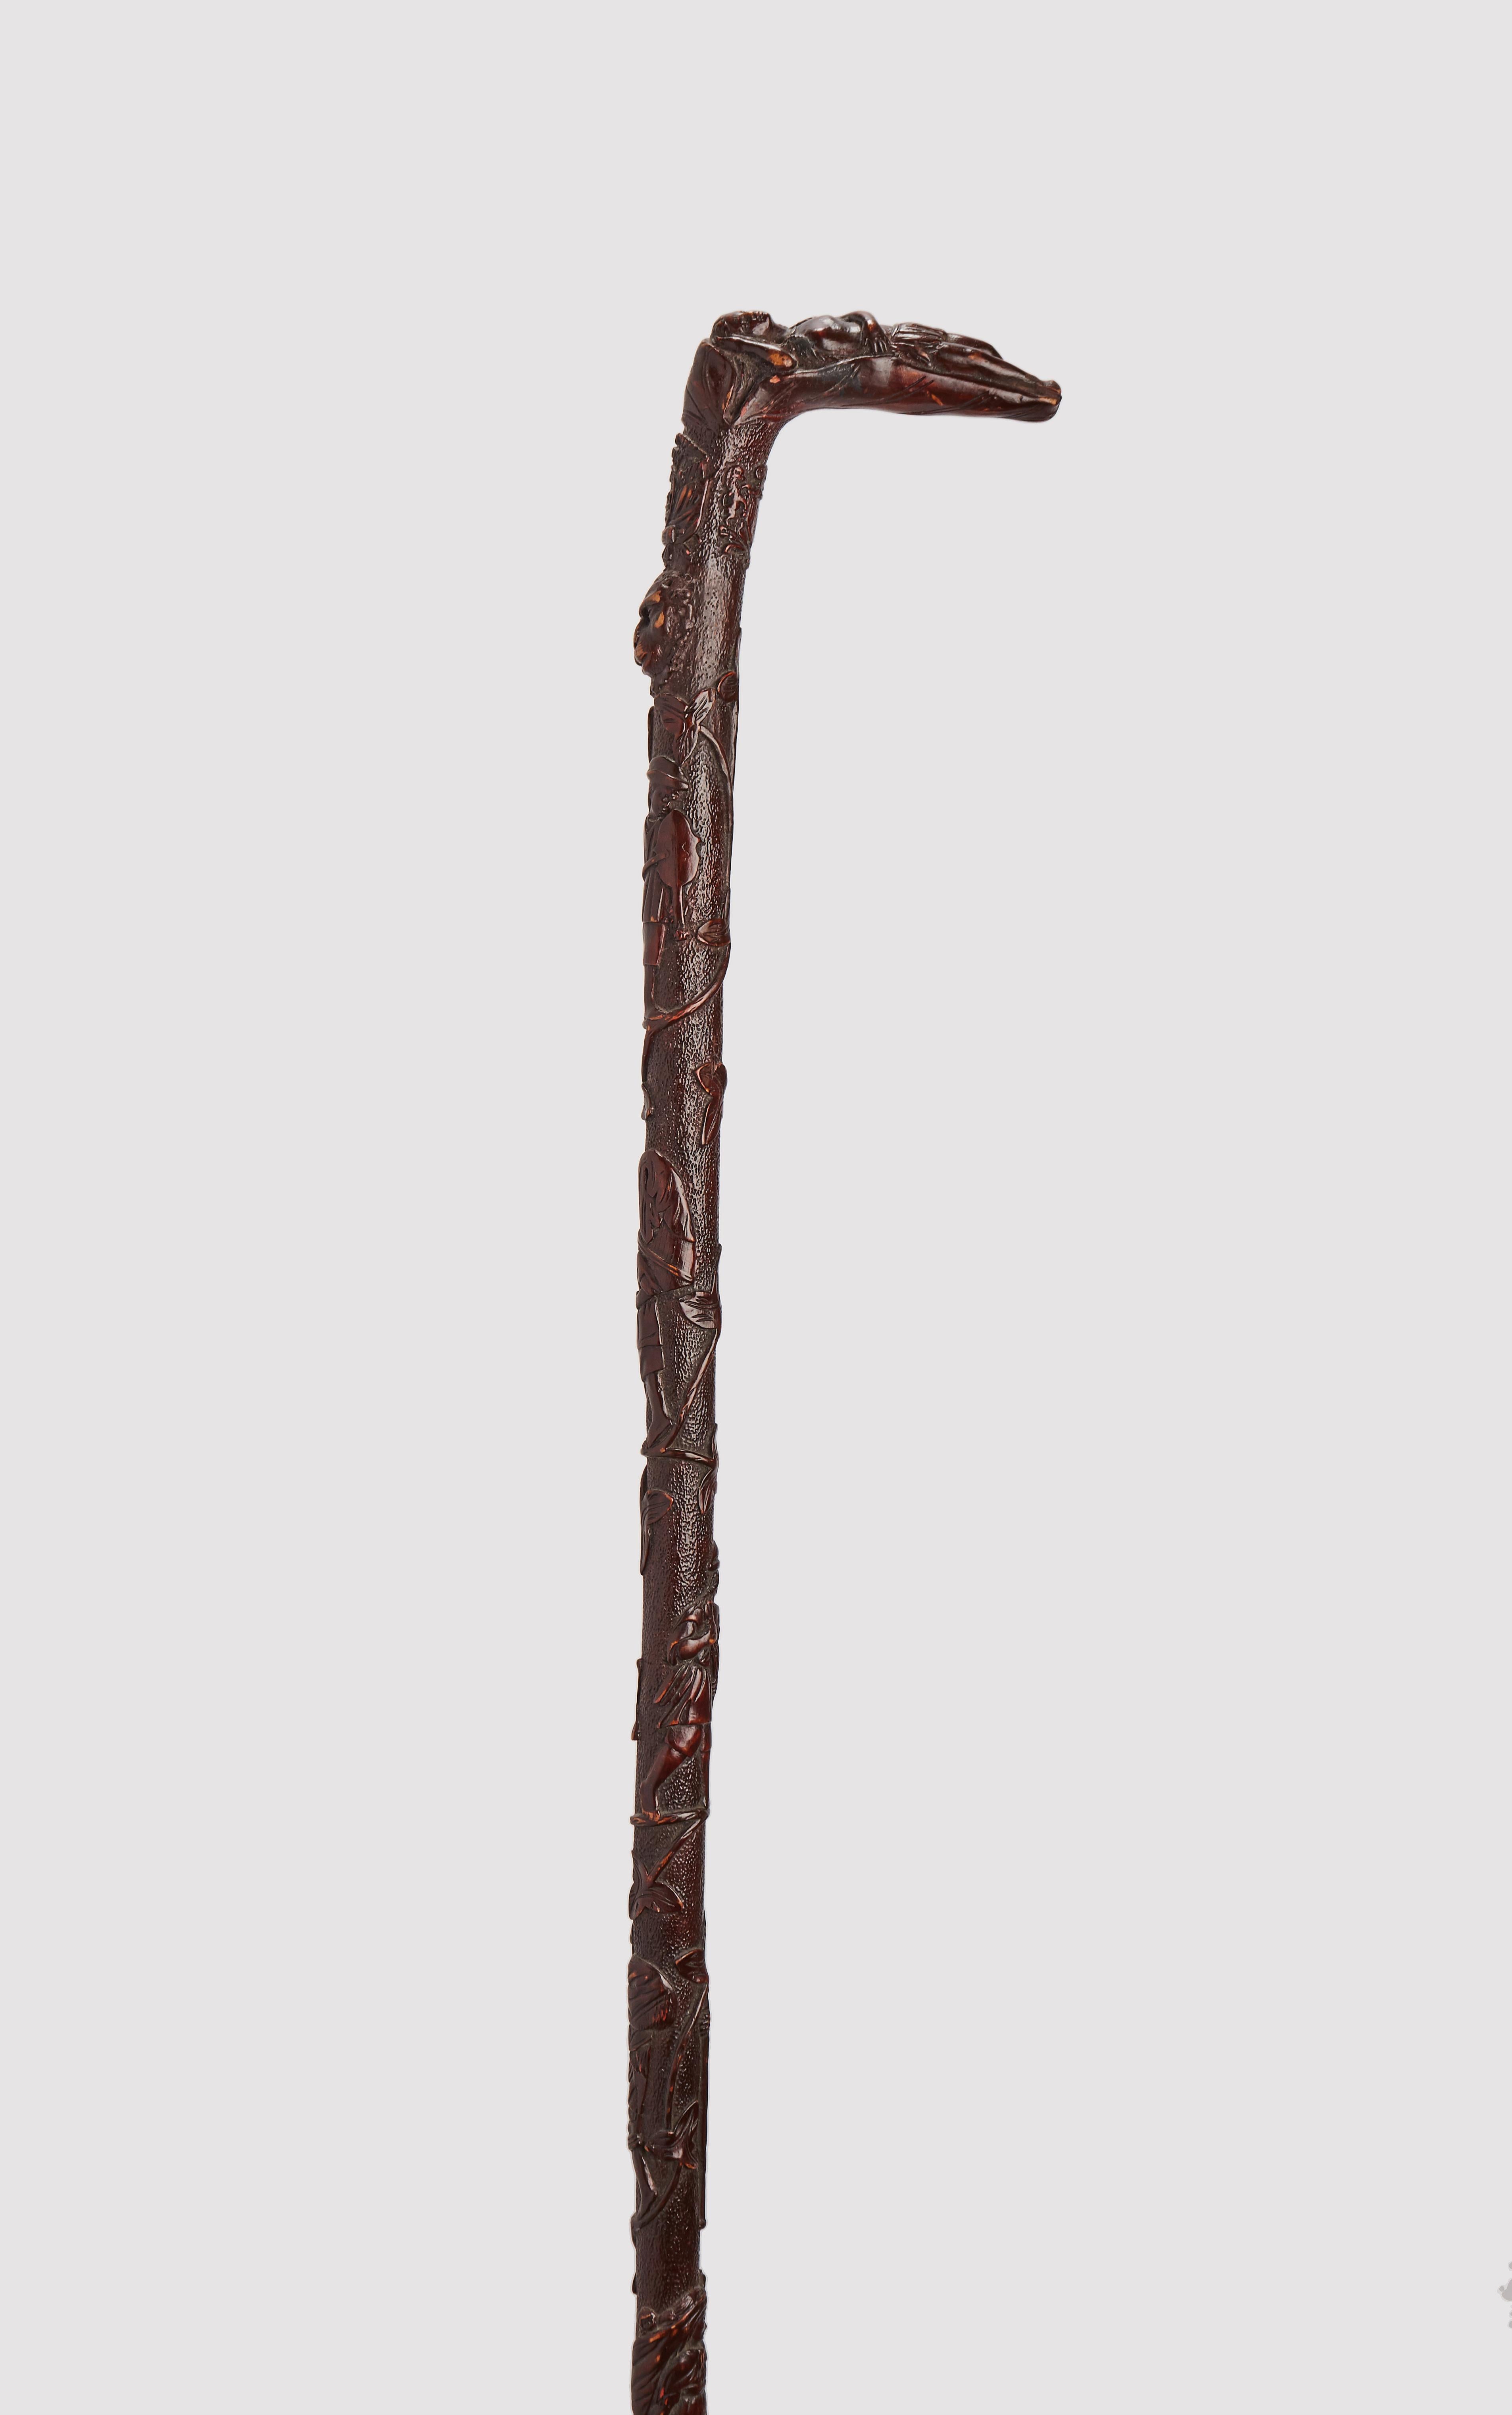 Folk Folk art stick. The barrel is carved and etched from a single branch of Mexican Maple (Acer skutchii) wood and finished with a dark brown patina.
The handle depicts the sculpture of an Indian woman lying down and resting on a sheet of tobacco.